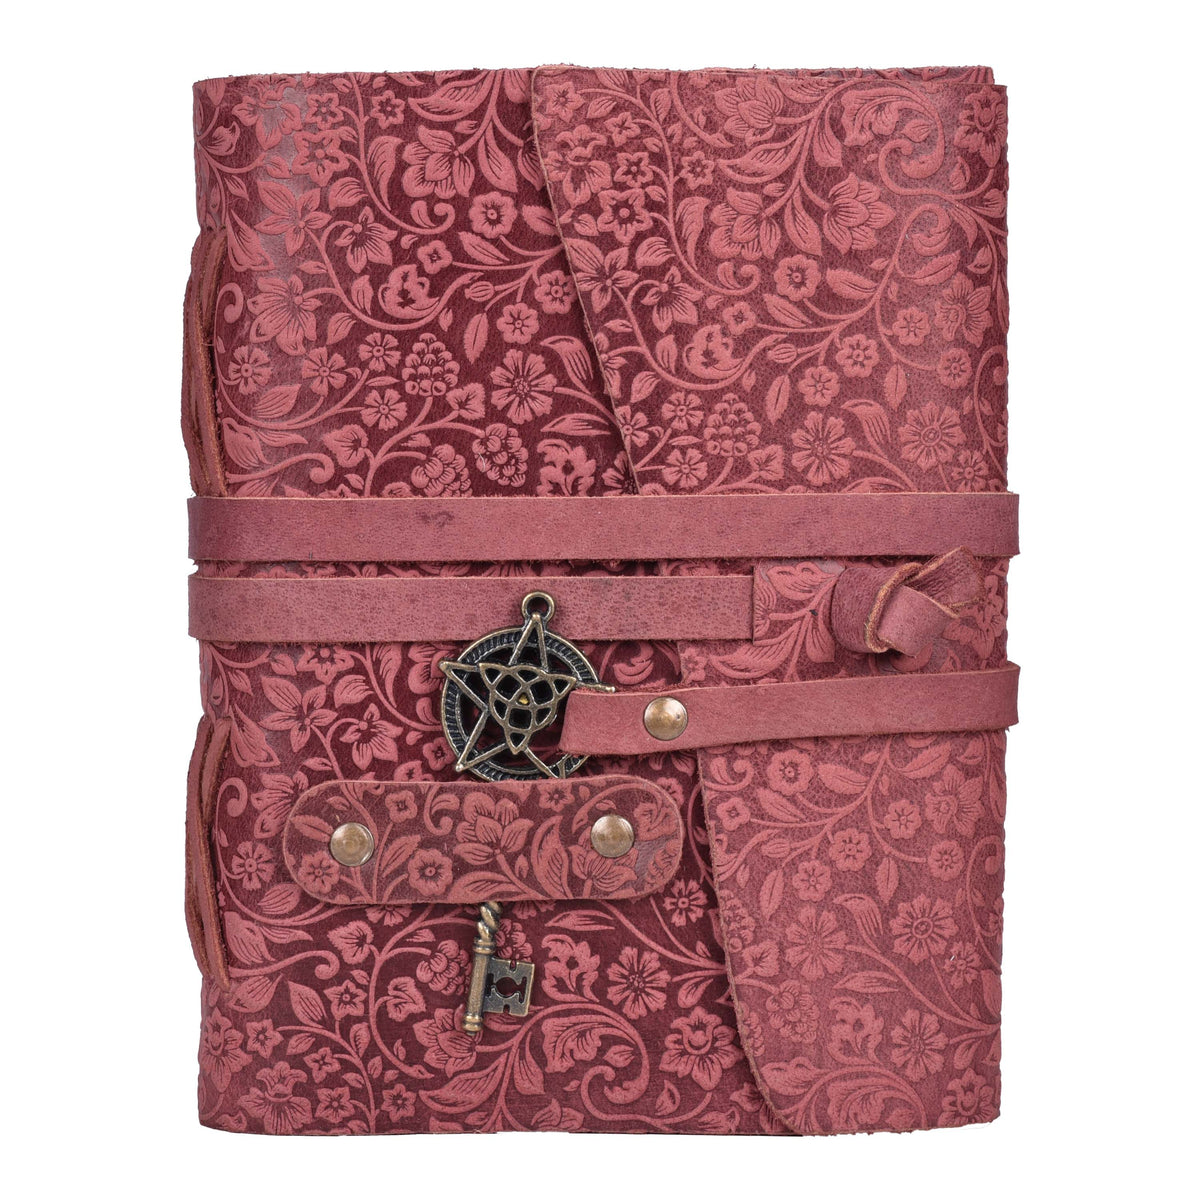 Fuchsia Color Leather Bound Journal Notebook 